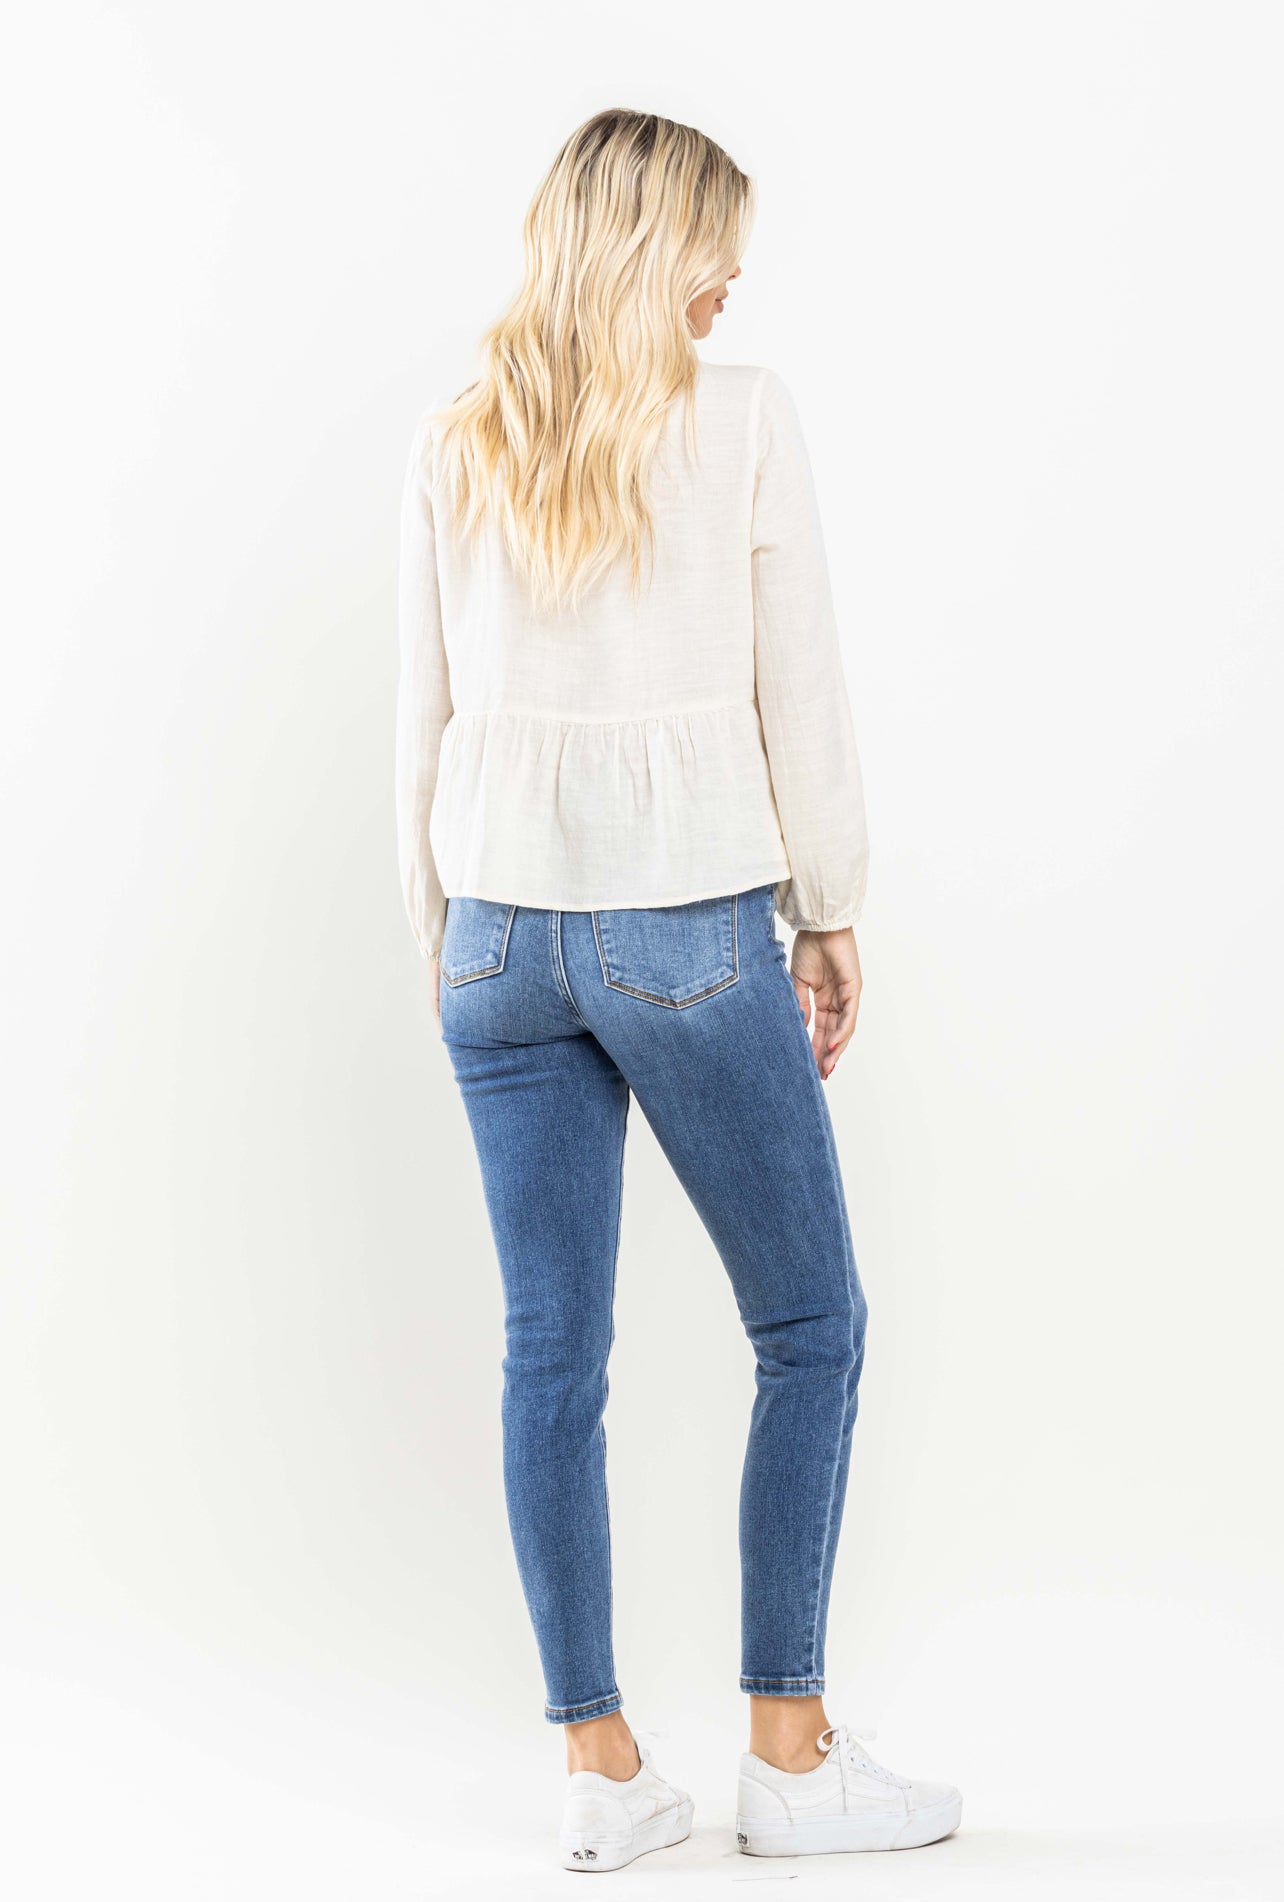 Keep You Warm HR Thermal Jeans